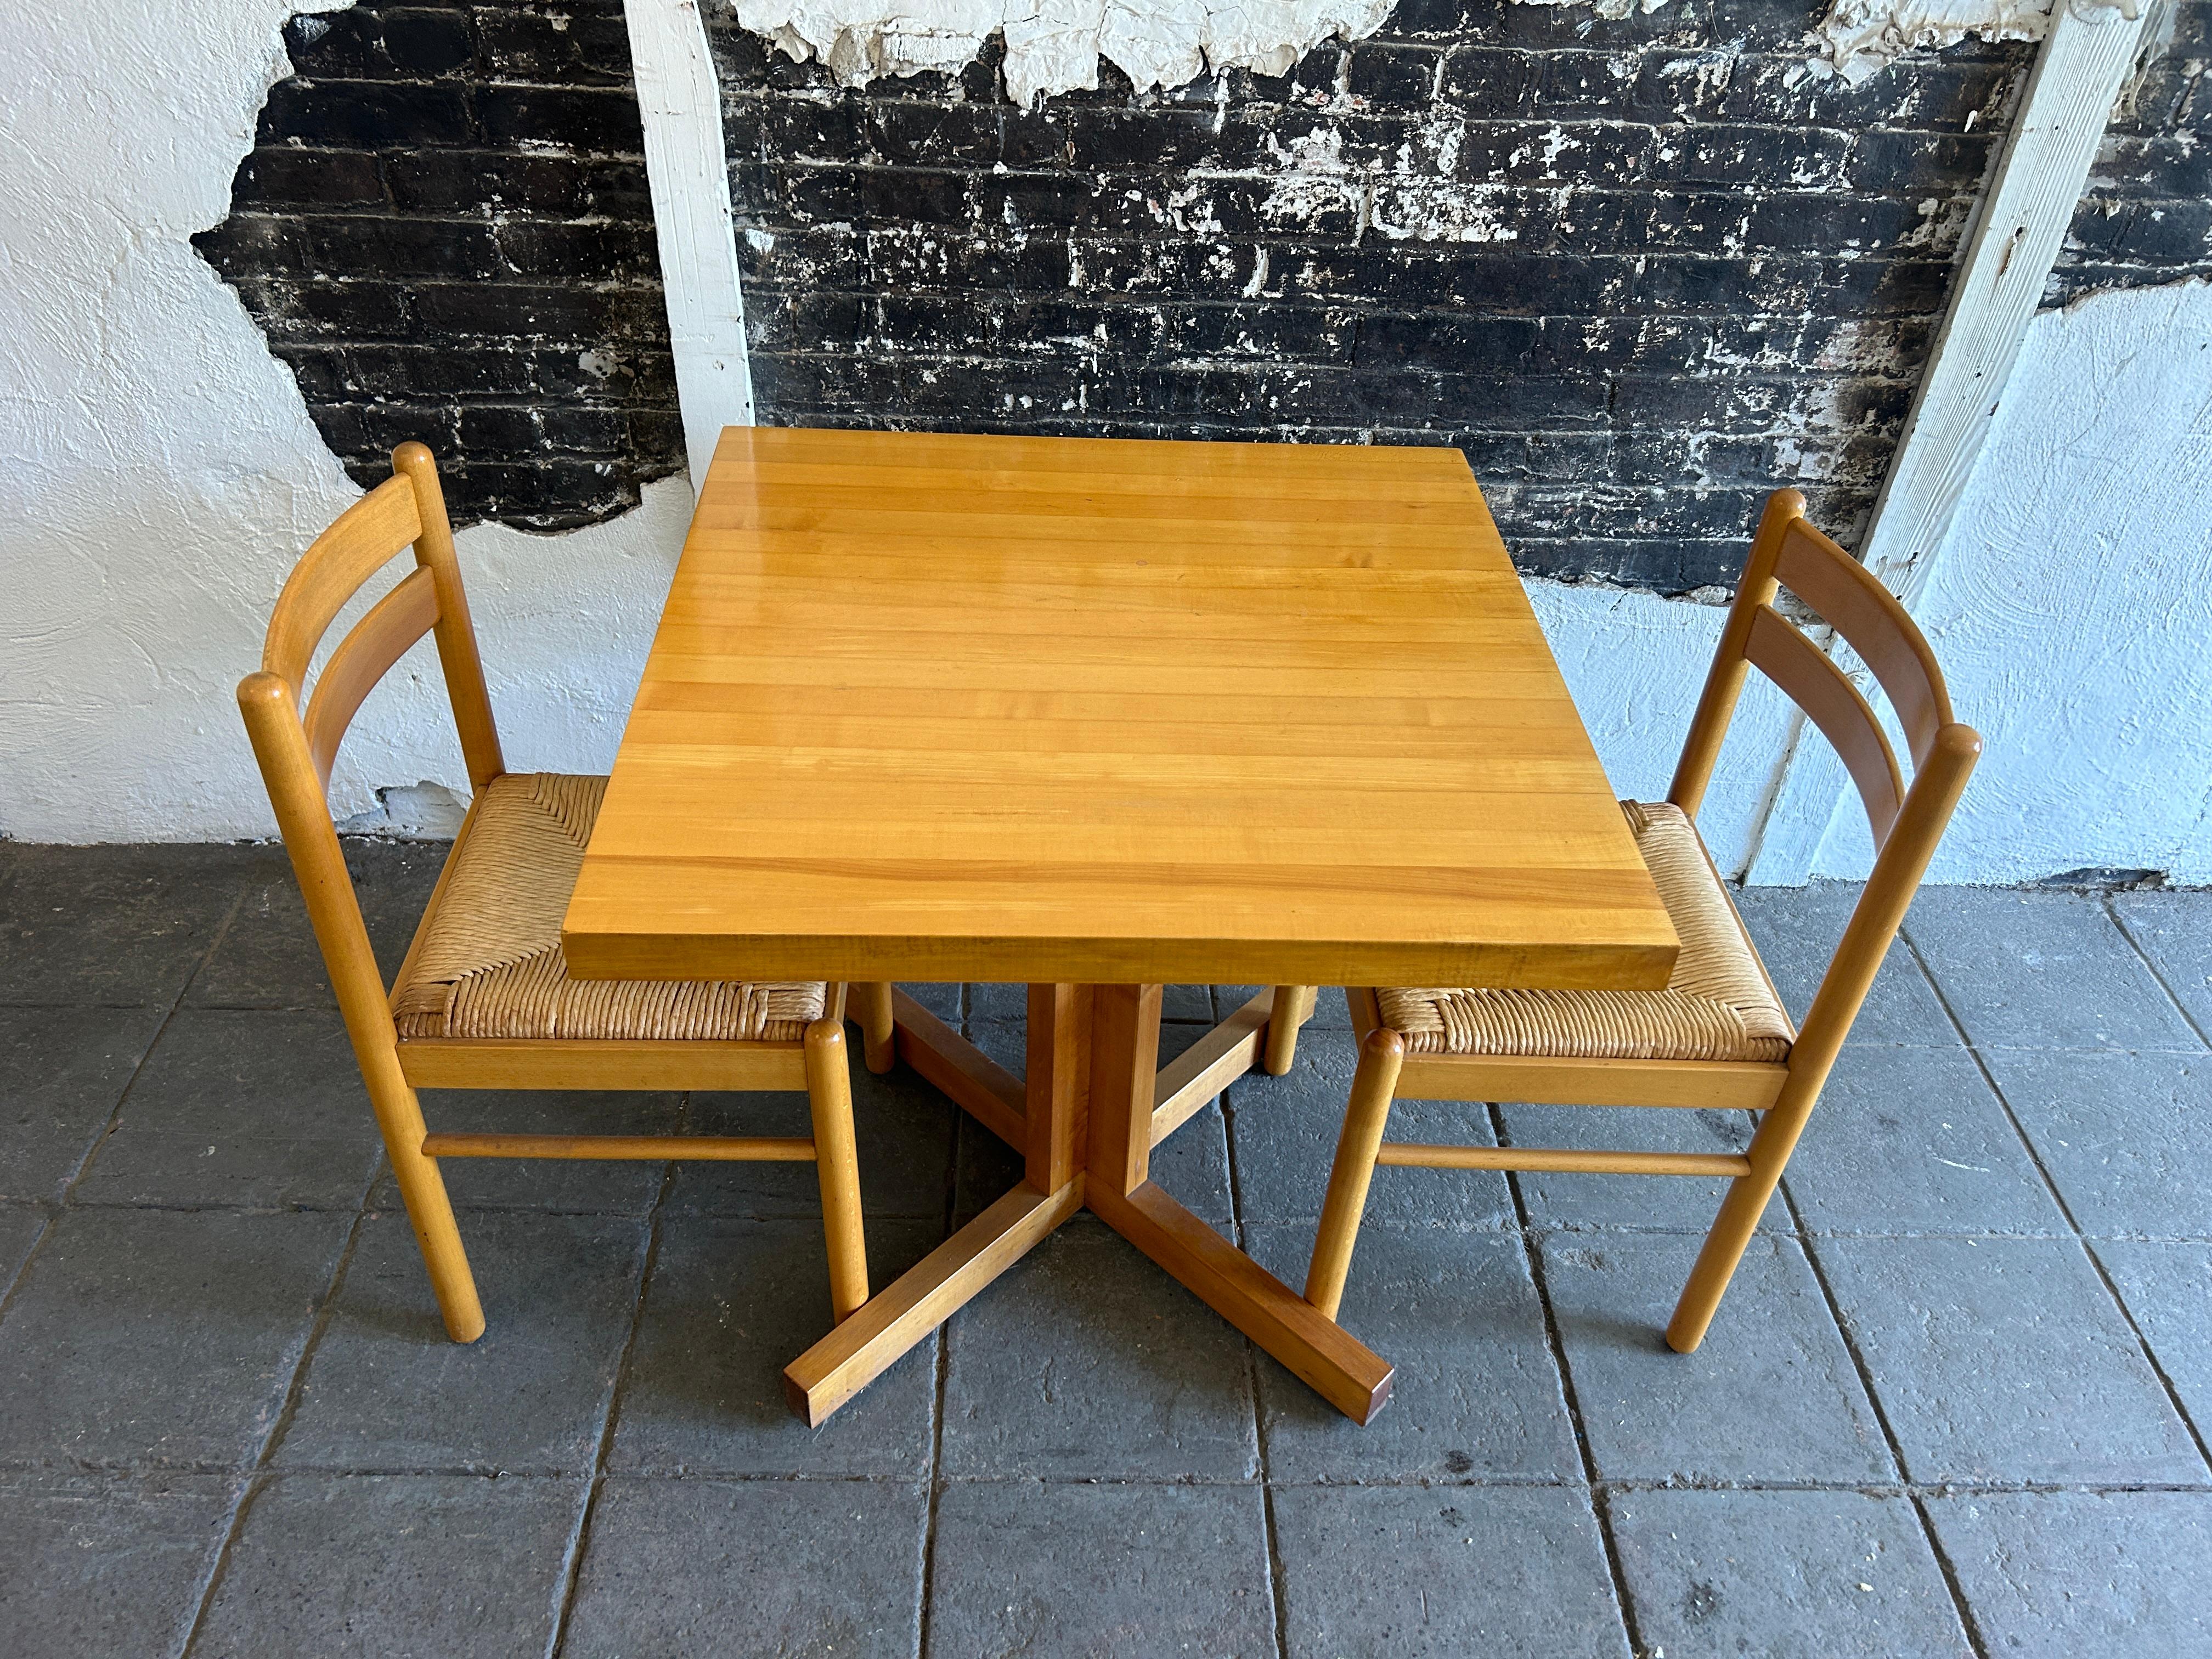 Beautiful butcher block dinette table set with pair of Birch Rush chairs Italy. Very clean small dining table with (2) paper cord birch wood post modern design chairs made in Italy. Chairs are labeled made in Italy. Table is a solid maple butcher